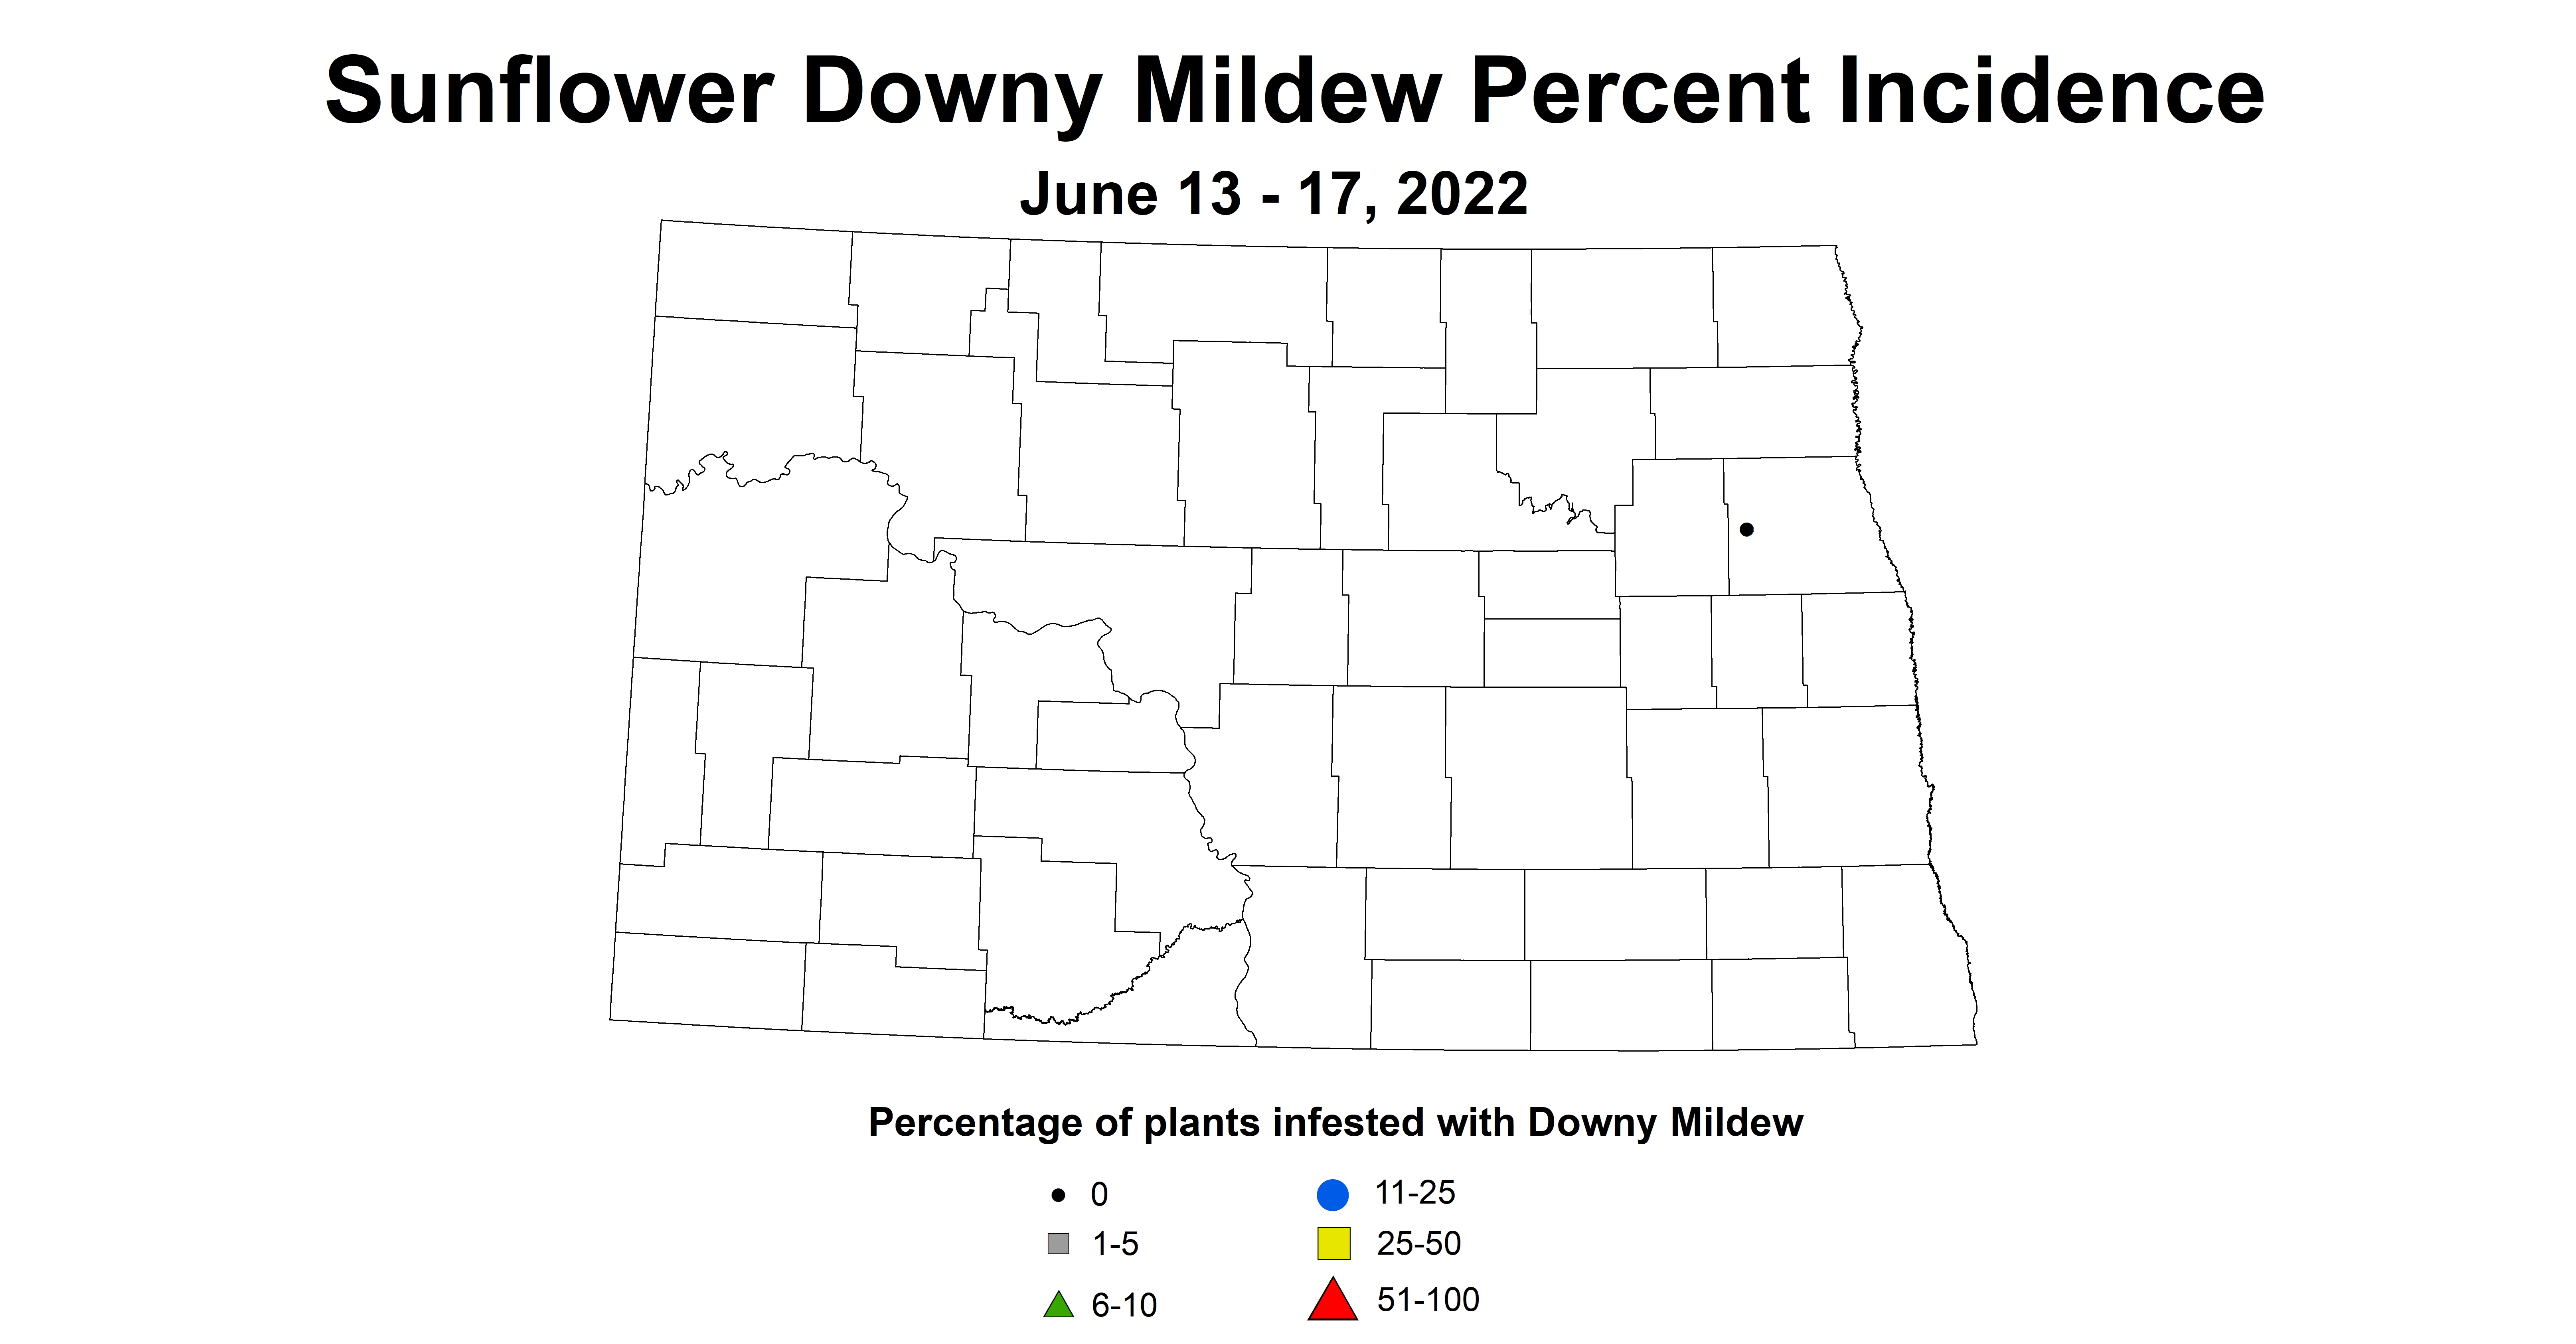 ND IPM map of sunflower downy mildew incidence June 13 - 17 2022